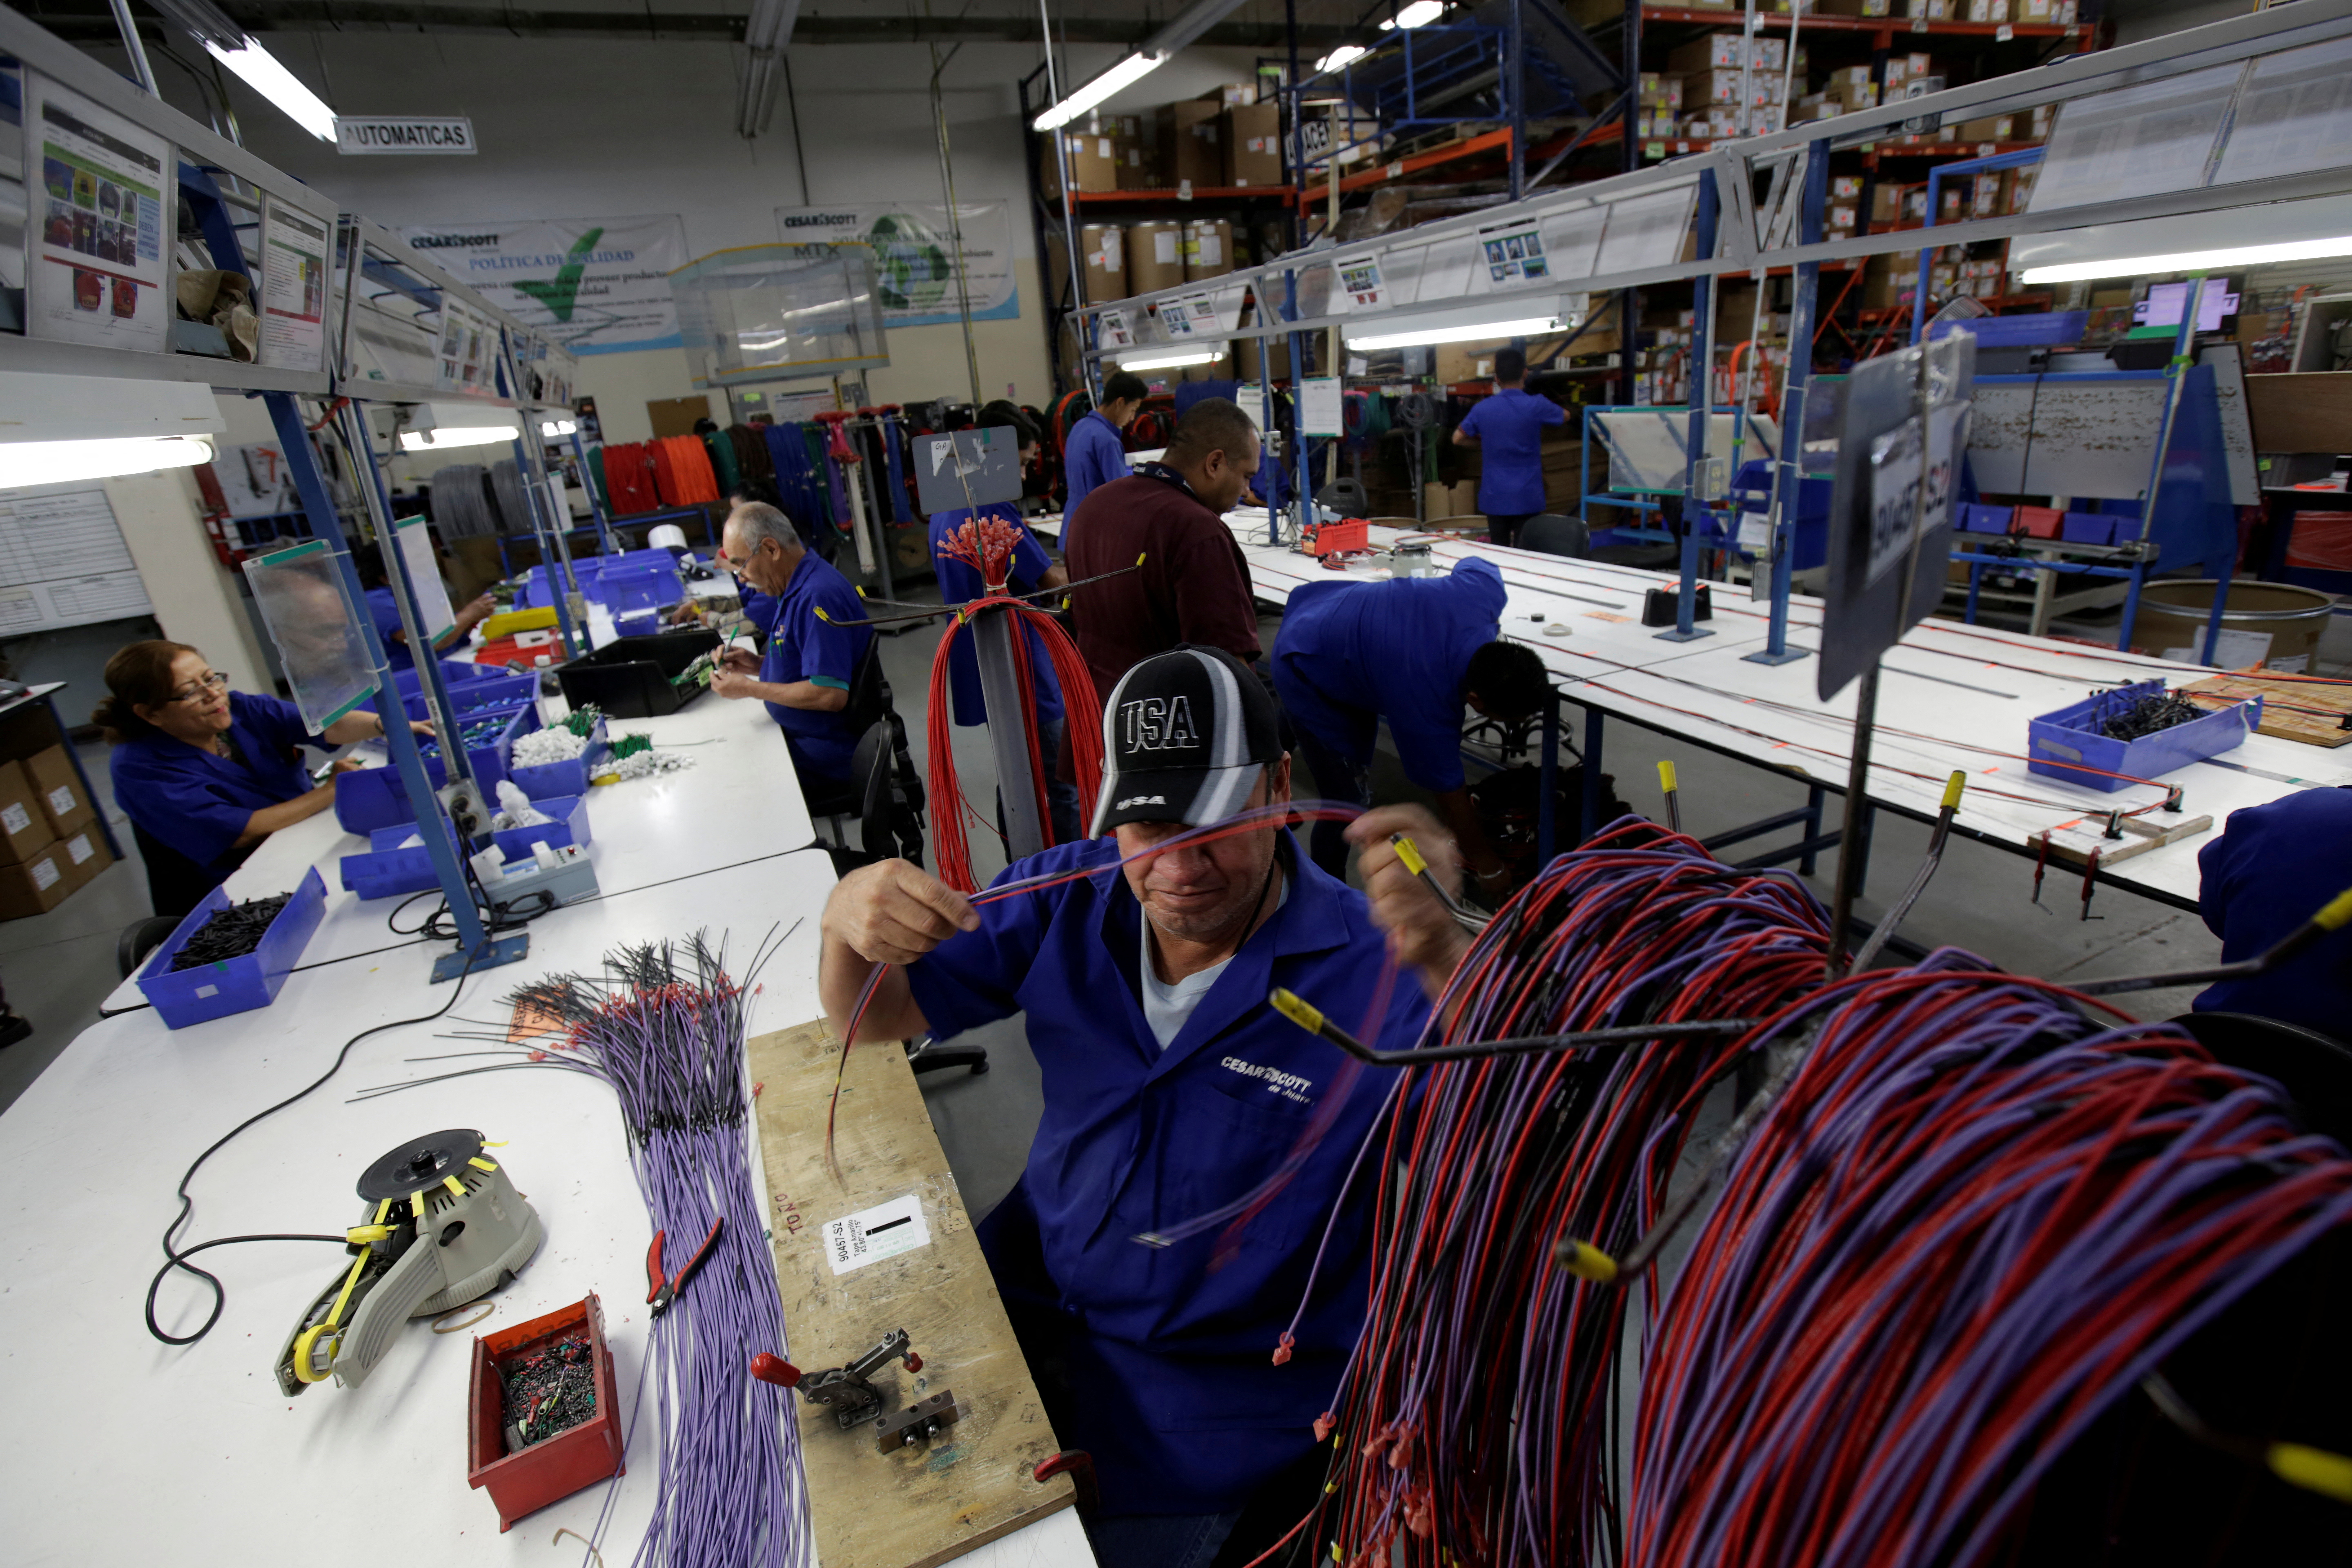 Employees work at a wire harness and cable assembly manufacturing company that exports to the U.S., in Ciudad Juarez